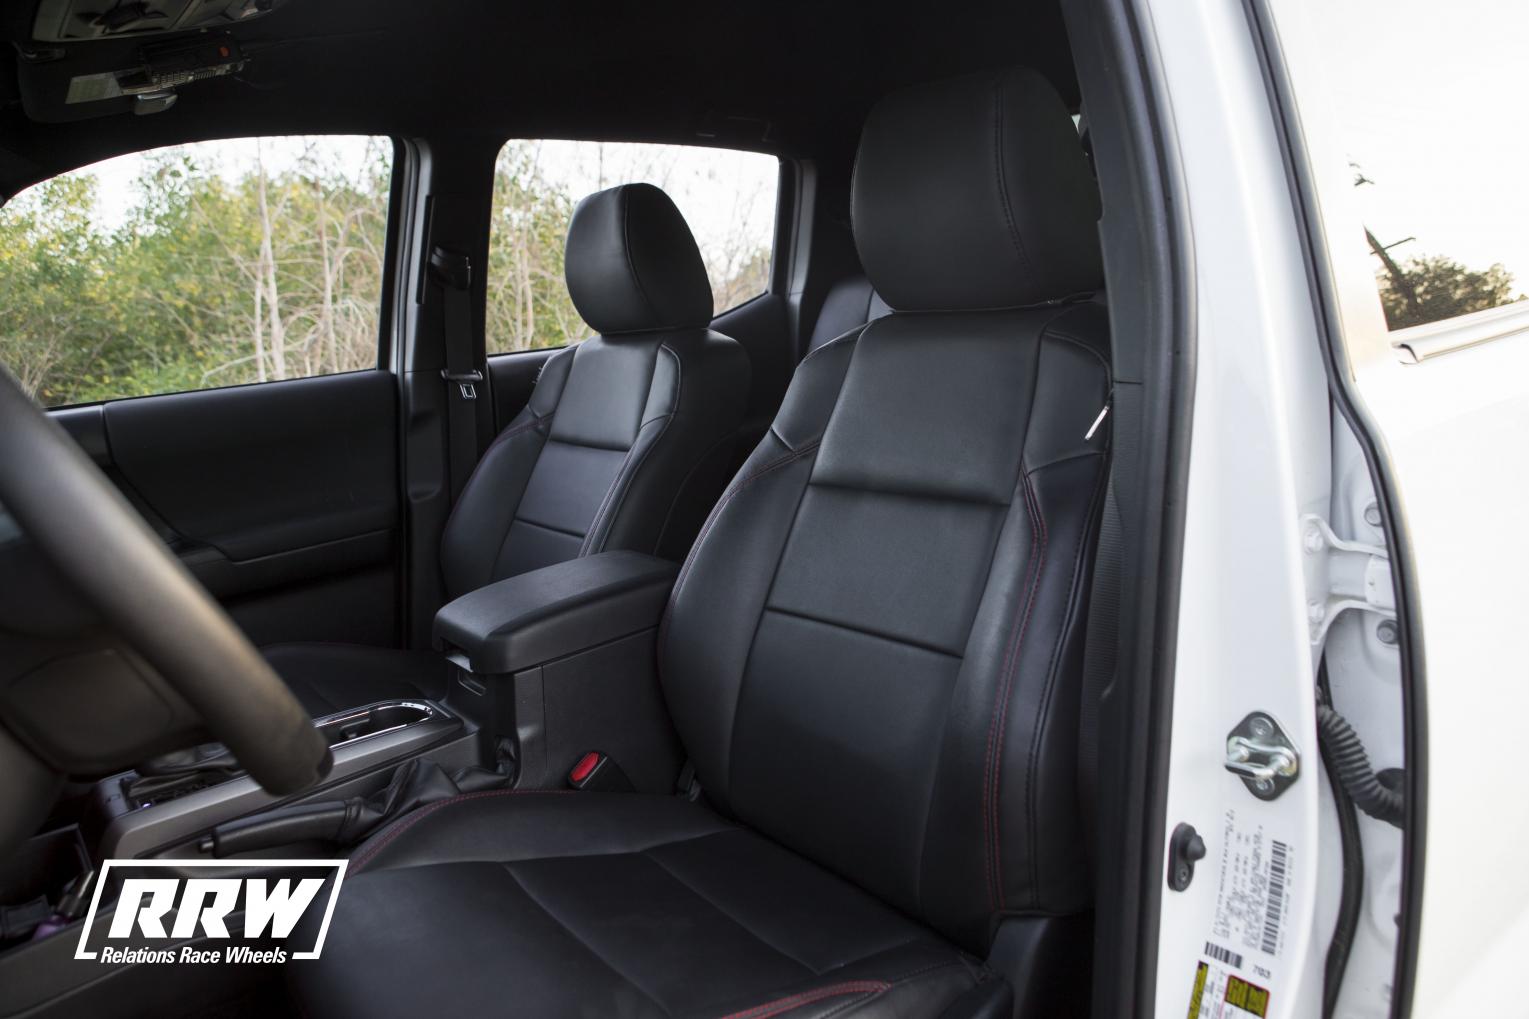 RRW Off-Road: Leatherette OEM Replacement Seat Covers - In-Stock!-1img_1889-igg-jpg